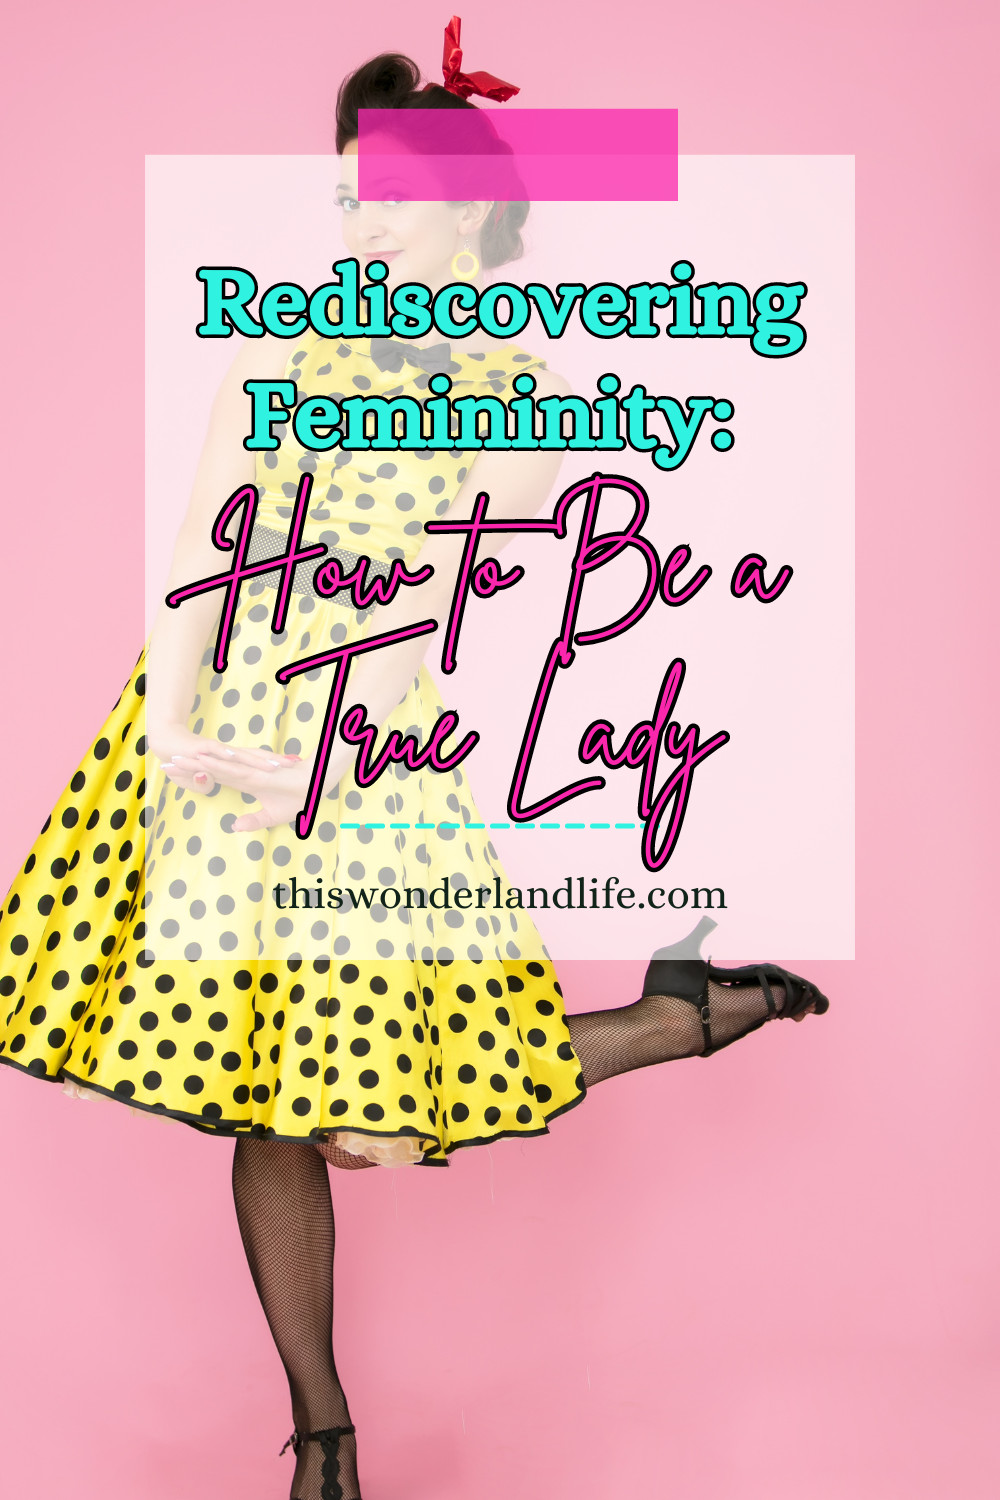 Rediscovering Femininity: How to Be a True Lady